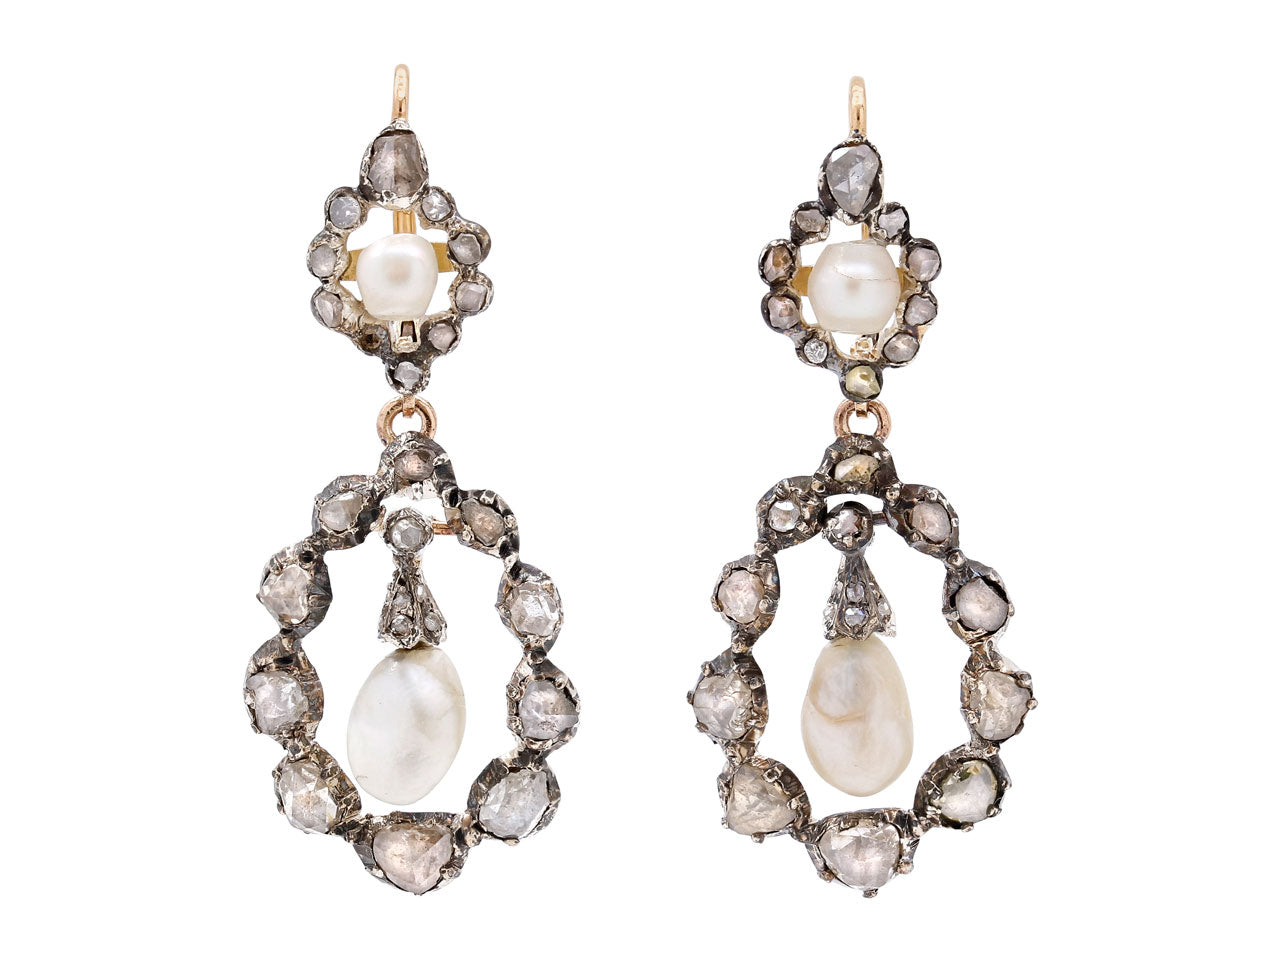 Antique Georgian Diamond and Pearl Earrings in Silver Over 9K Gold